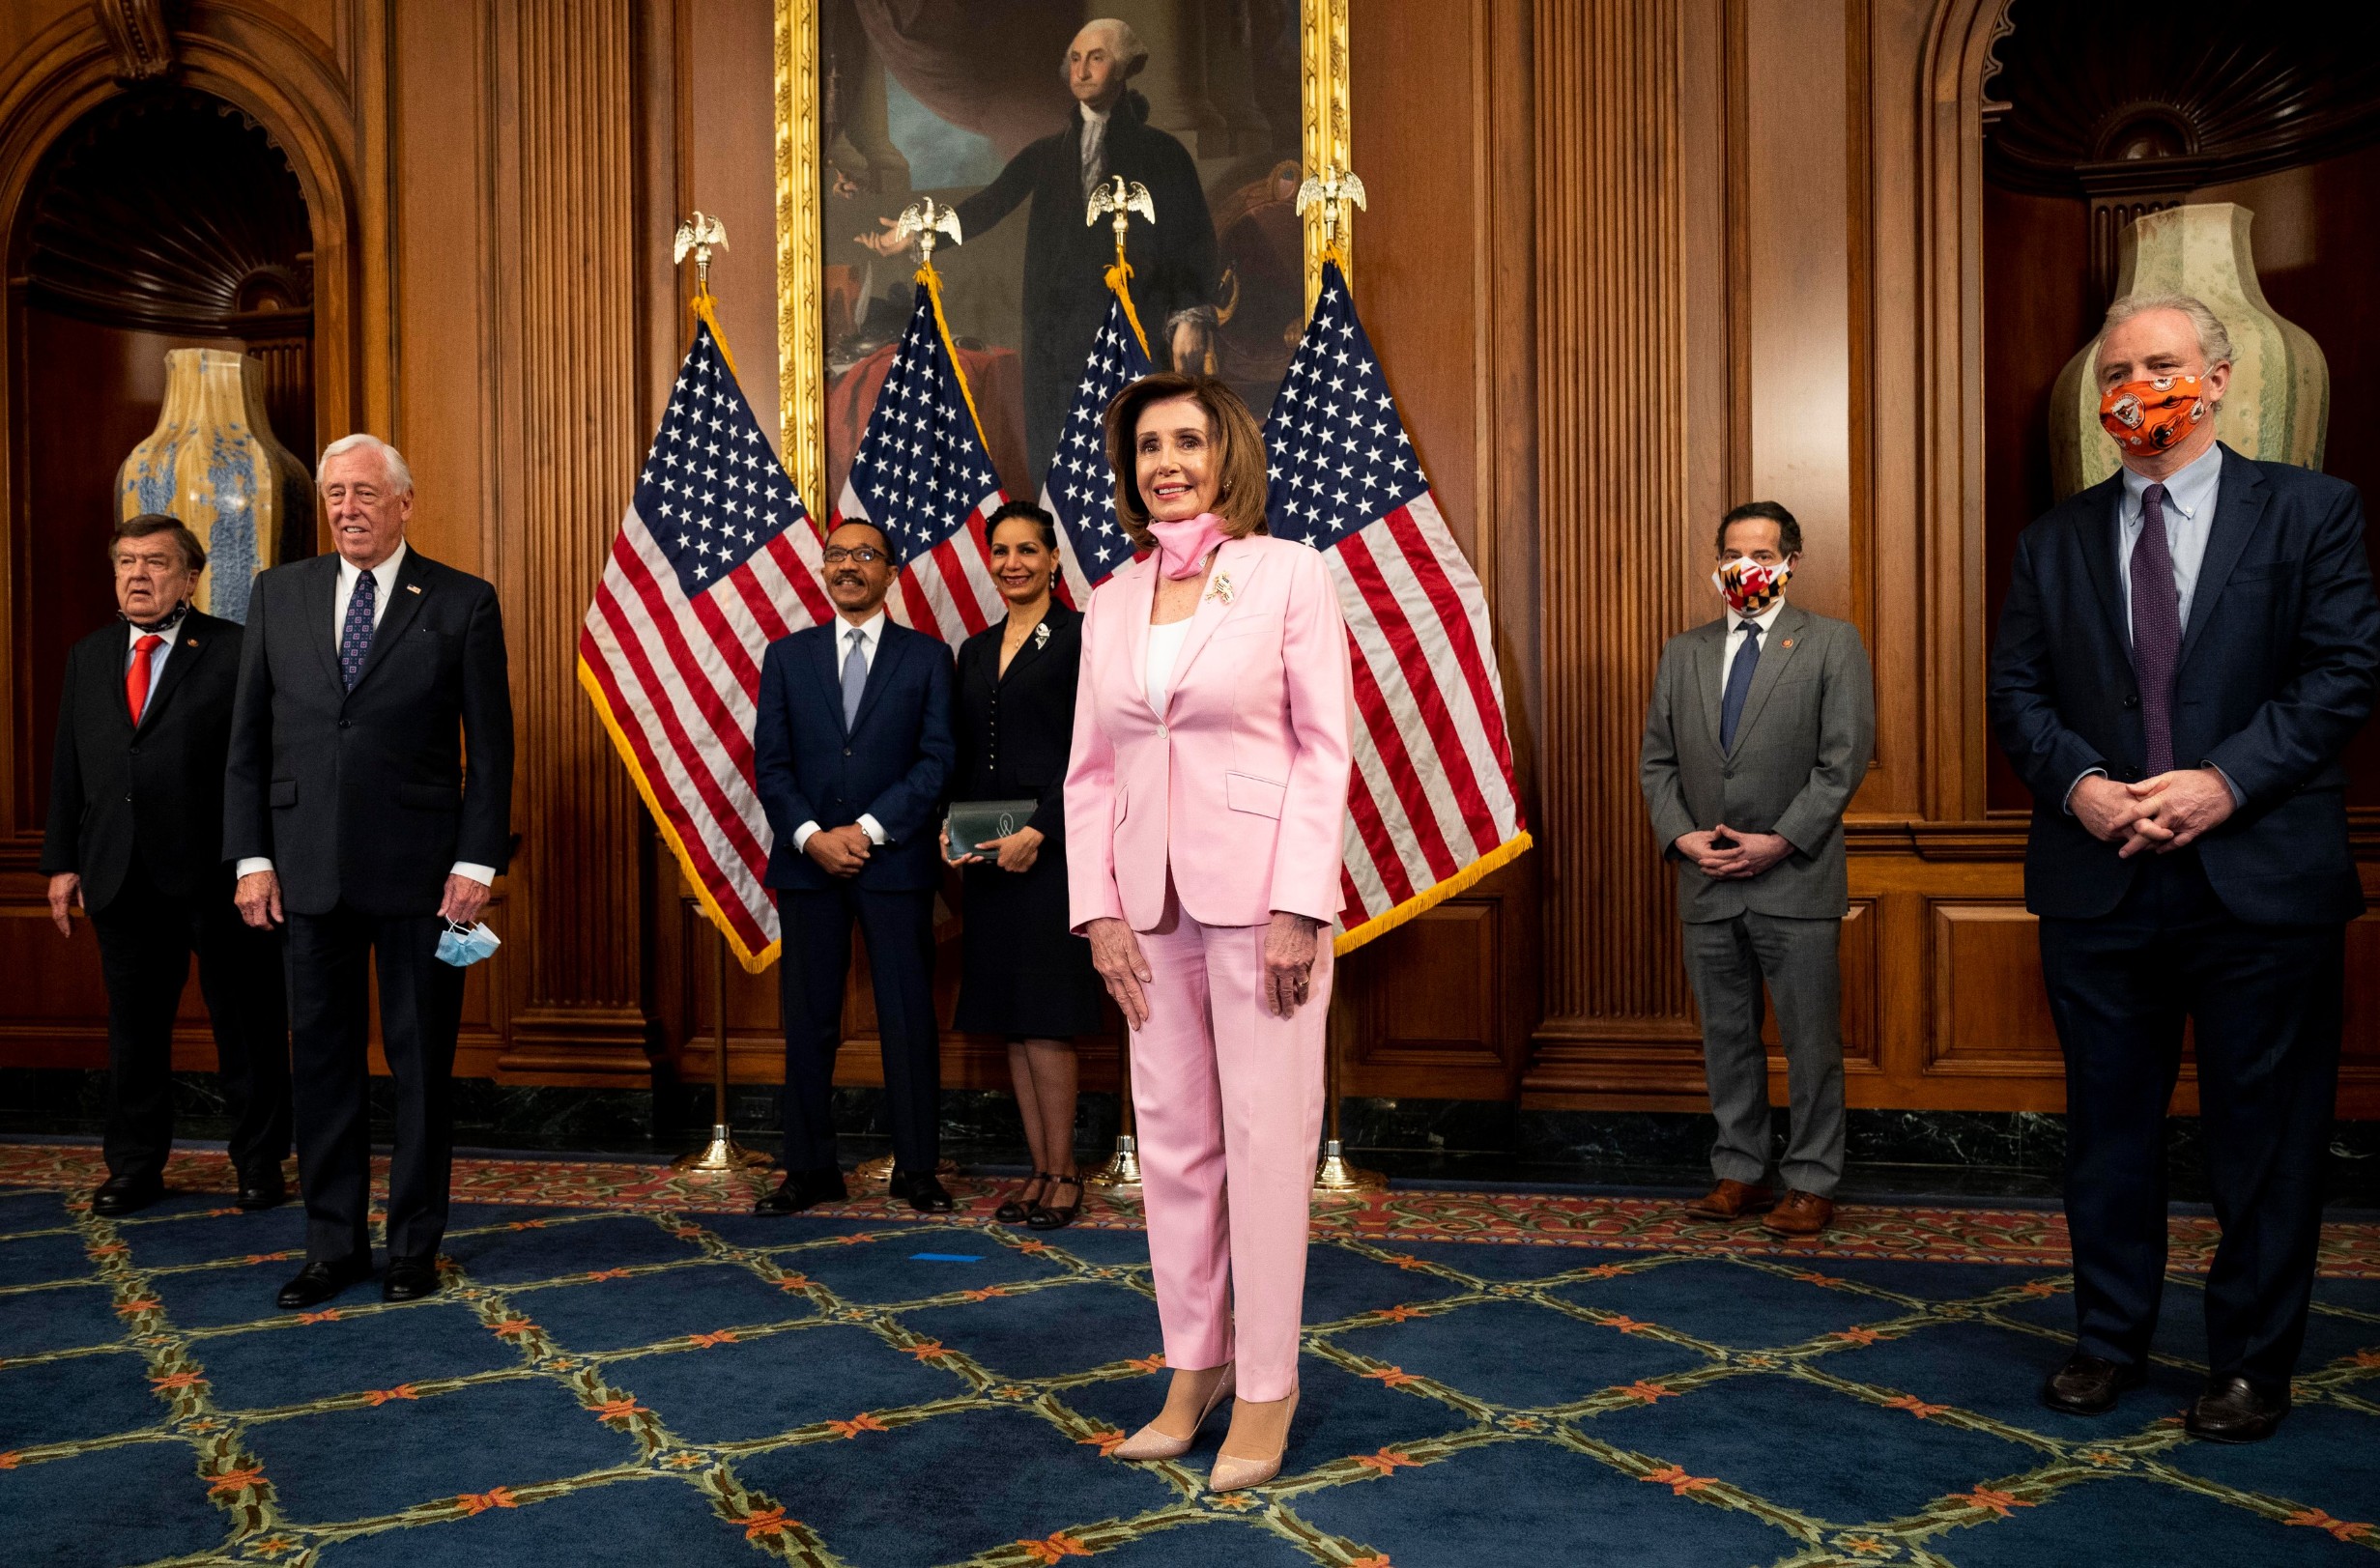 May 5, 2020, Washington, DC, United States: May 5, 2020 - Washington, DC, United States: U.S. Representative NANCY PELOSI (D-CA) at the ceremonial swearing in of Representative Elect KWEISI MFUME, Image: 517256064, License: Rights-managed, Restrictions: , Model Release: no, Credit line: Michael Brochstein / Zuma Press / Profimedia